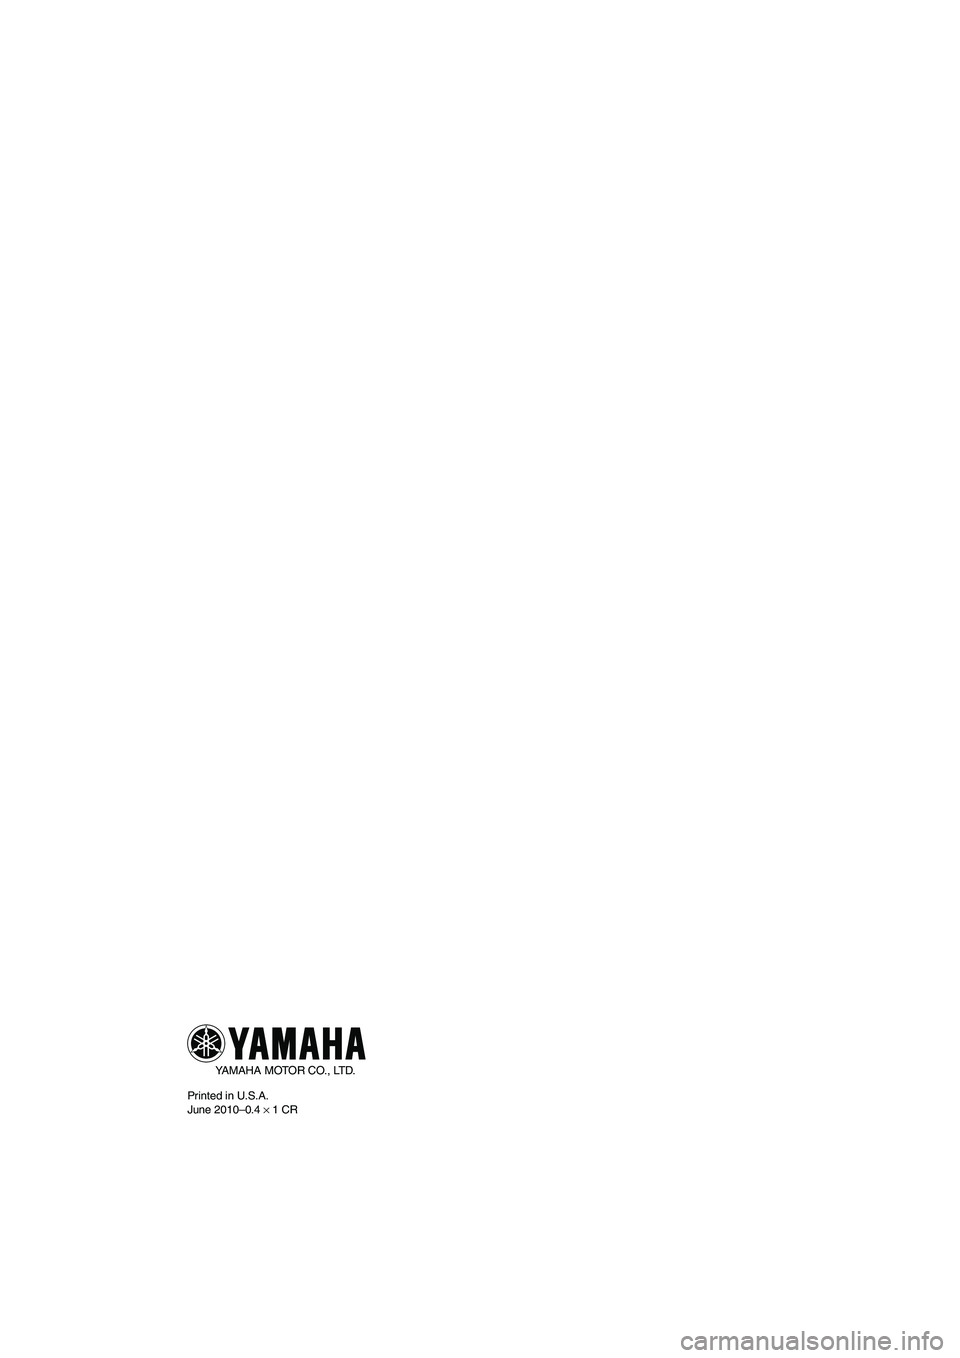 YAMAHA SVHO 2011  Owners Manual YAMAHA MOTOR CO., LTD.
Printed in U.S.A.
June 2010–0.4 × 1 CR
UF1W73E0.book  Page 1  Monday, June 7, 2010  9:17 AM 